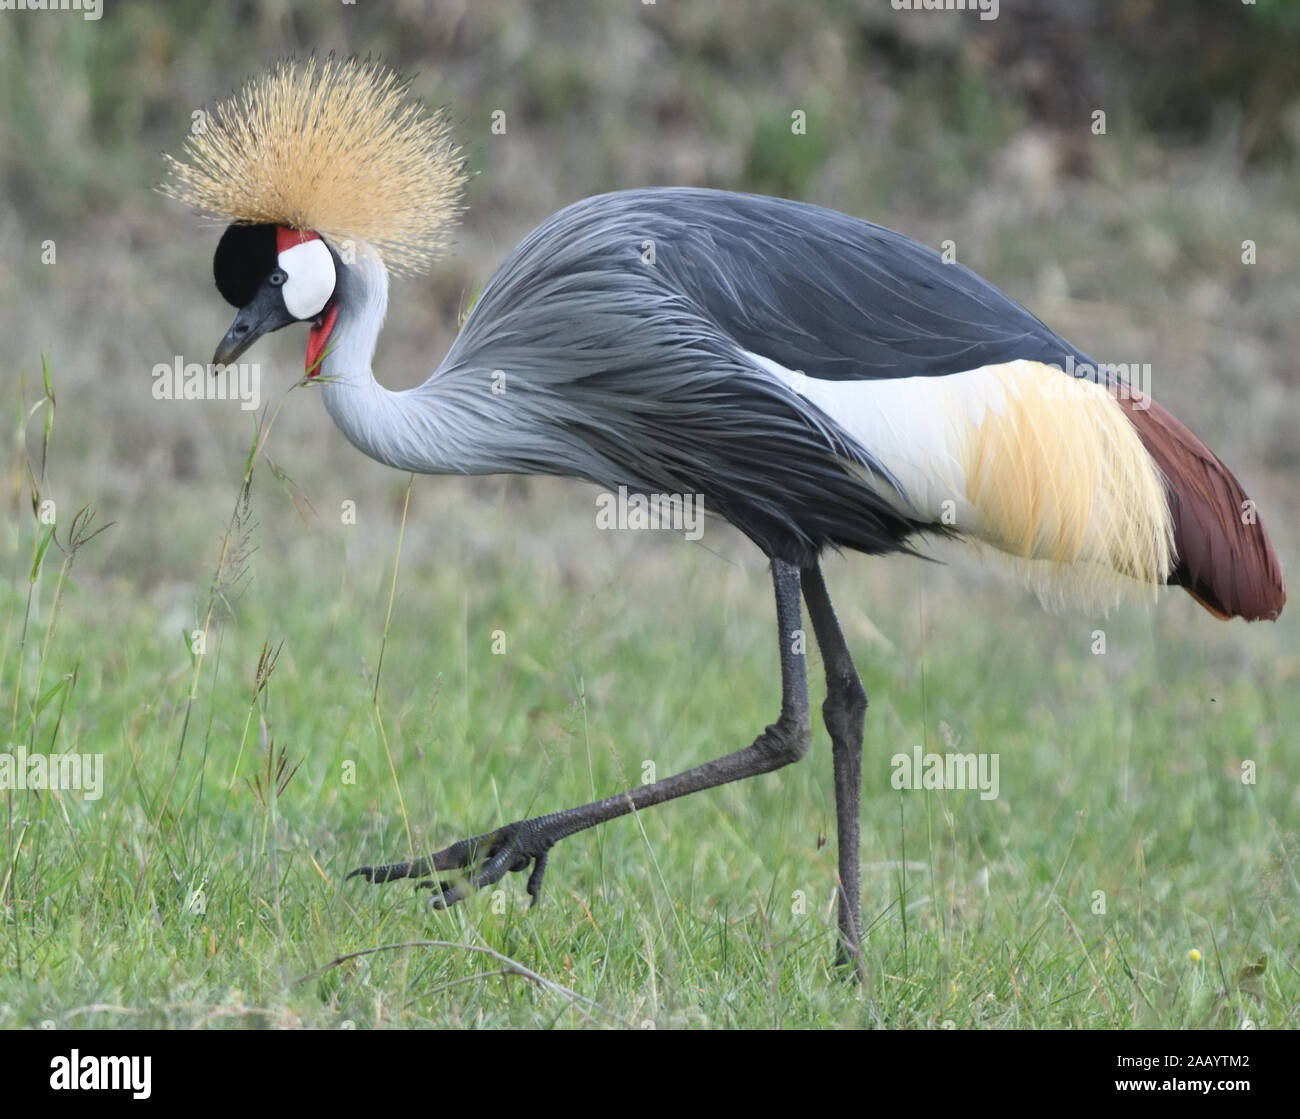 An omnivorous grey crowned crane (Balearica regulorum) searching for seeds and invertebrates in dry grass. Serengeti National Park, Tanzania. Stock Photo